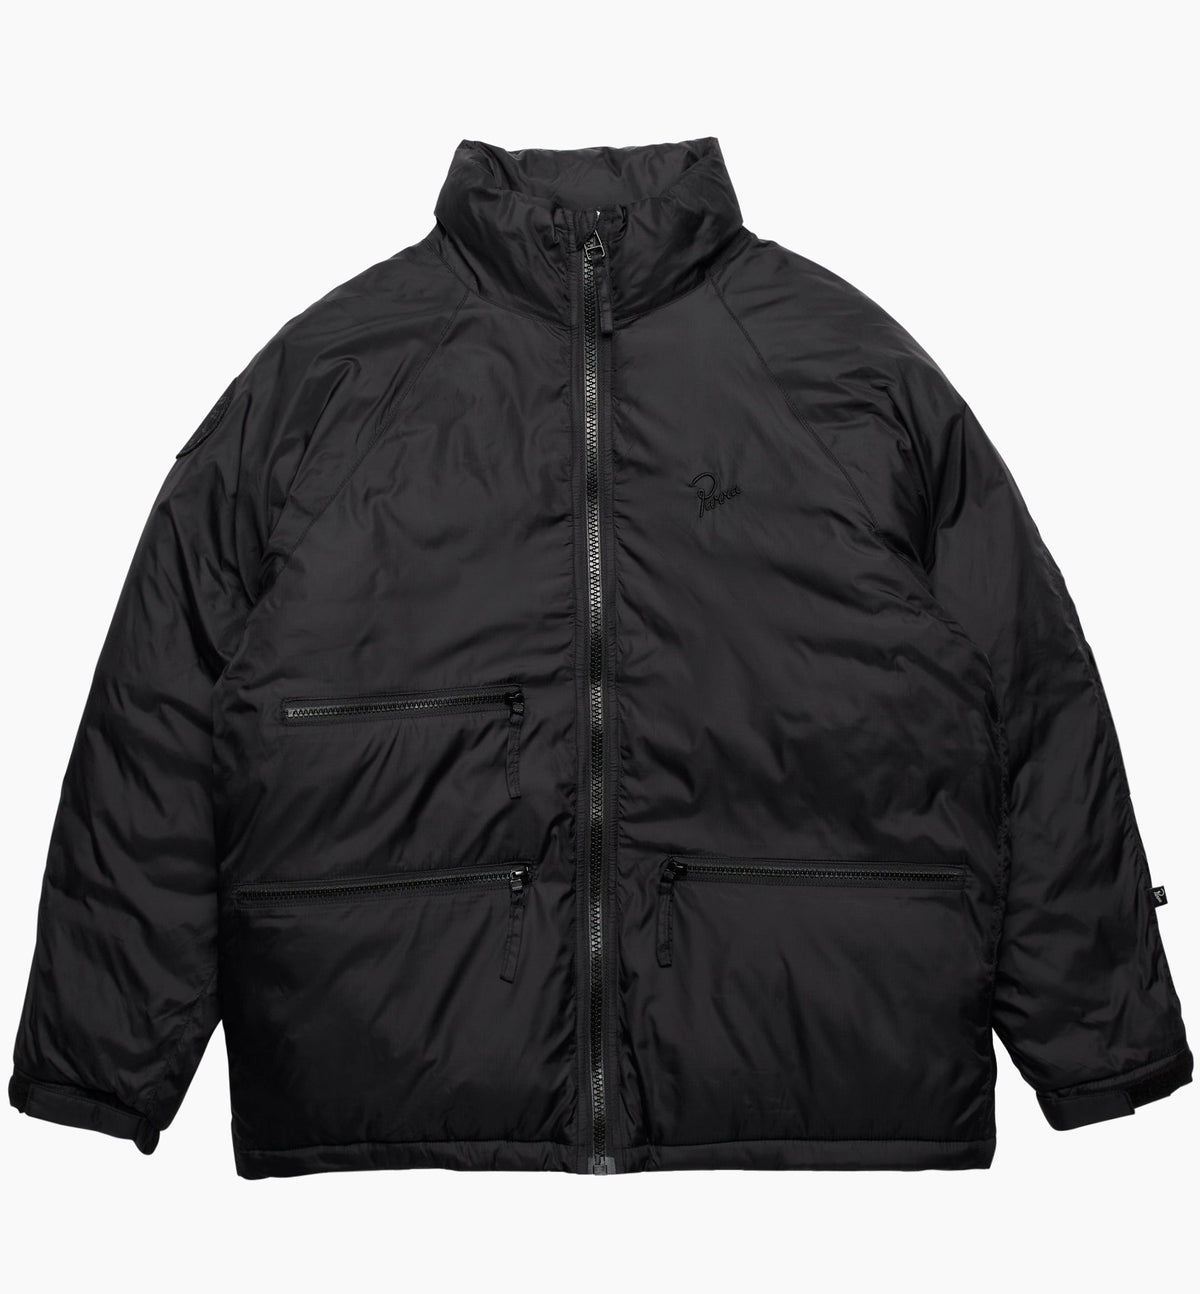 BY PARRA CANYONS ALL OVER JACKET